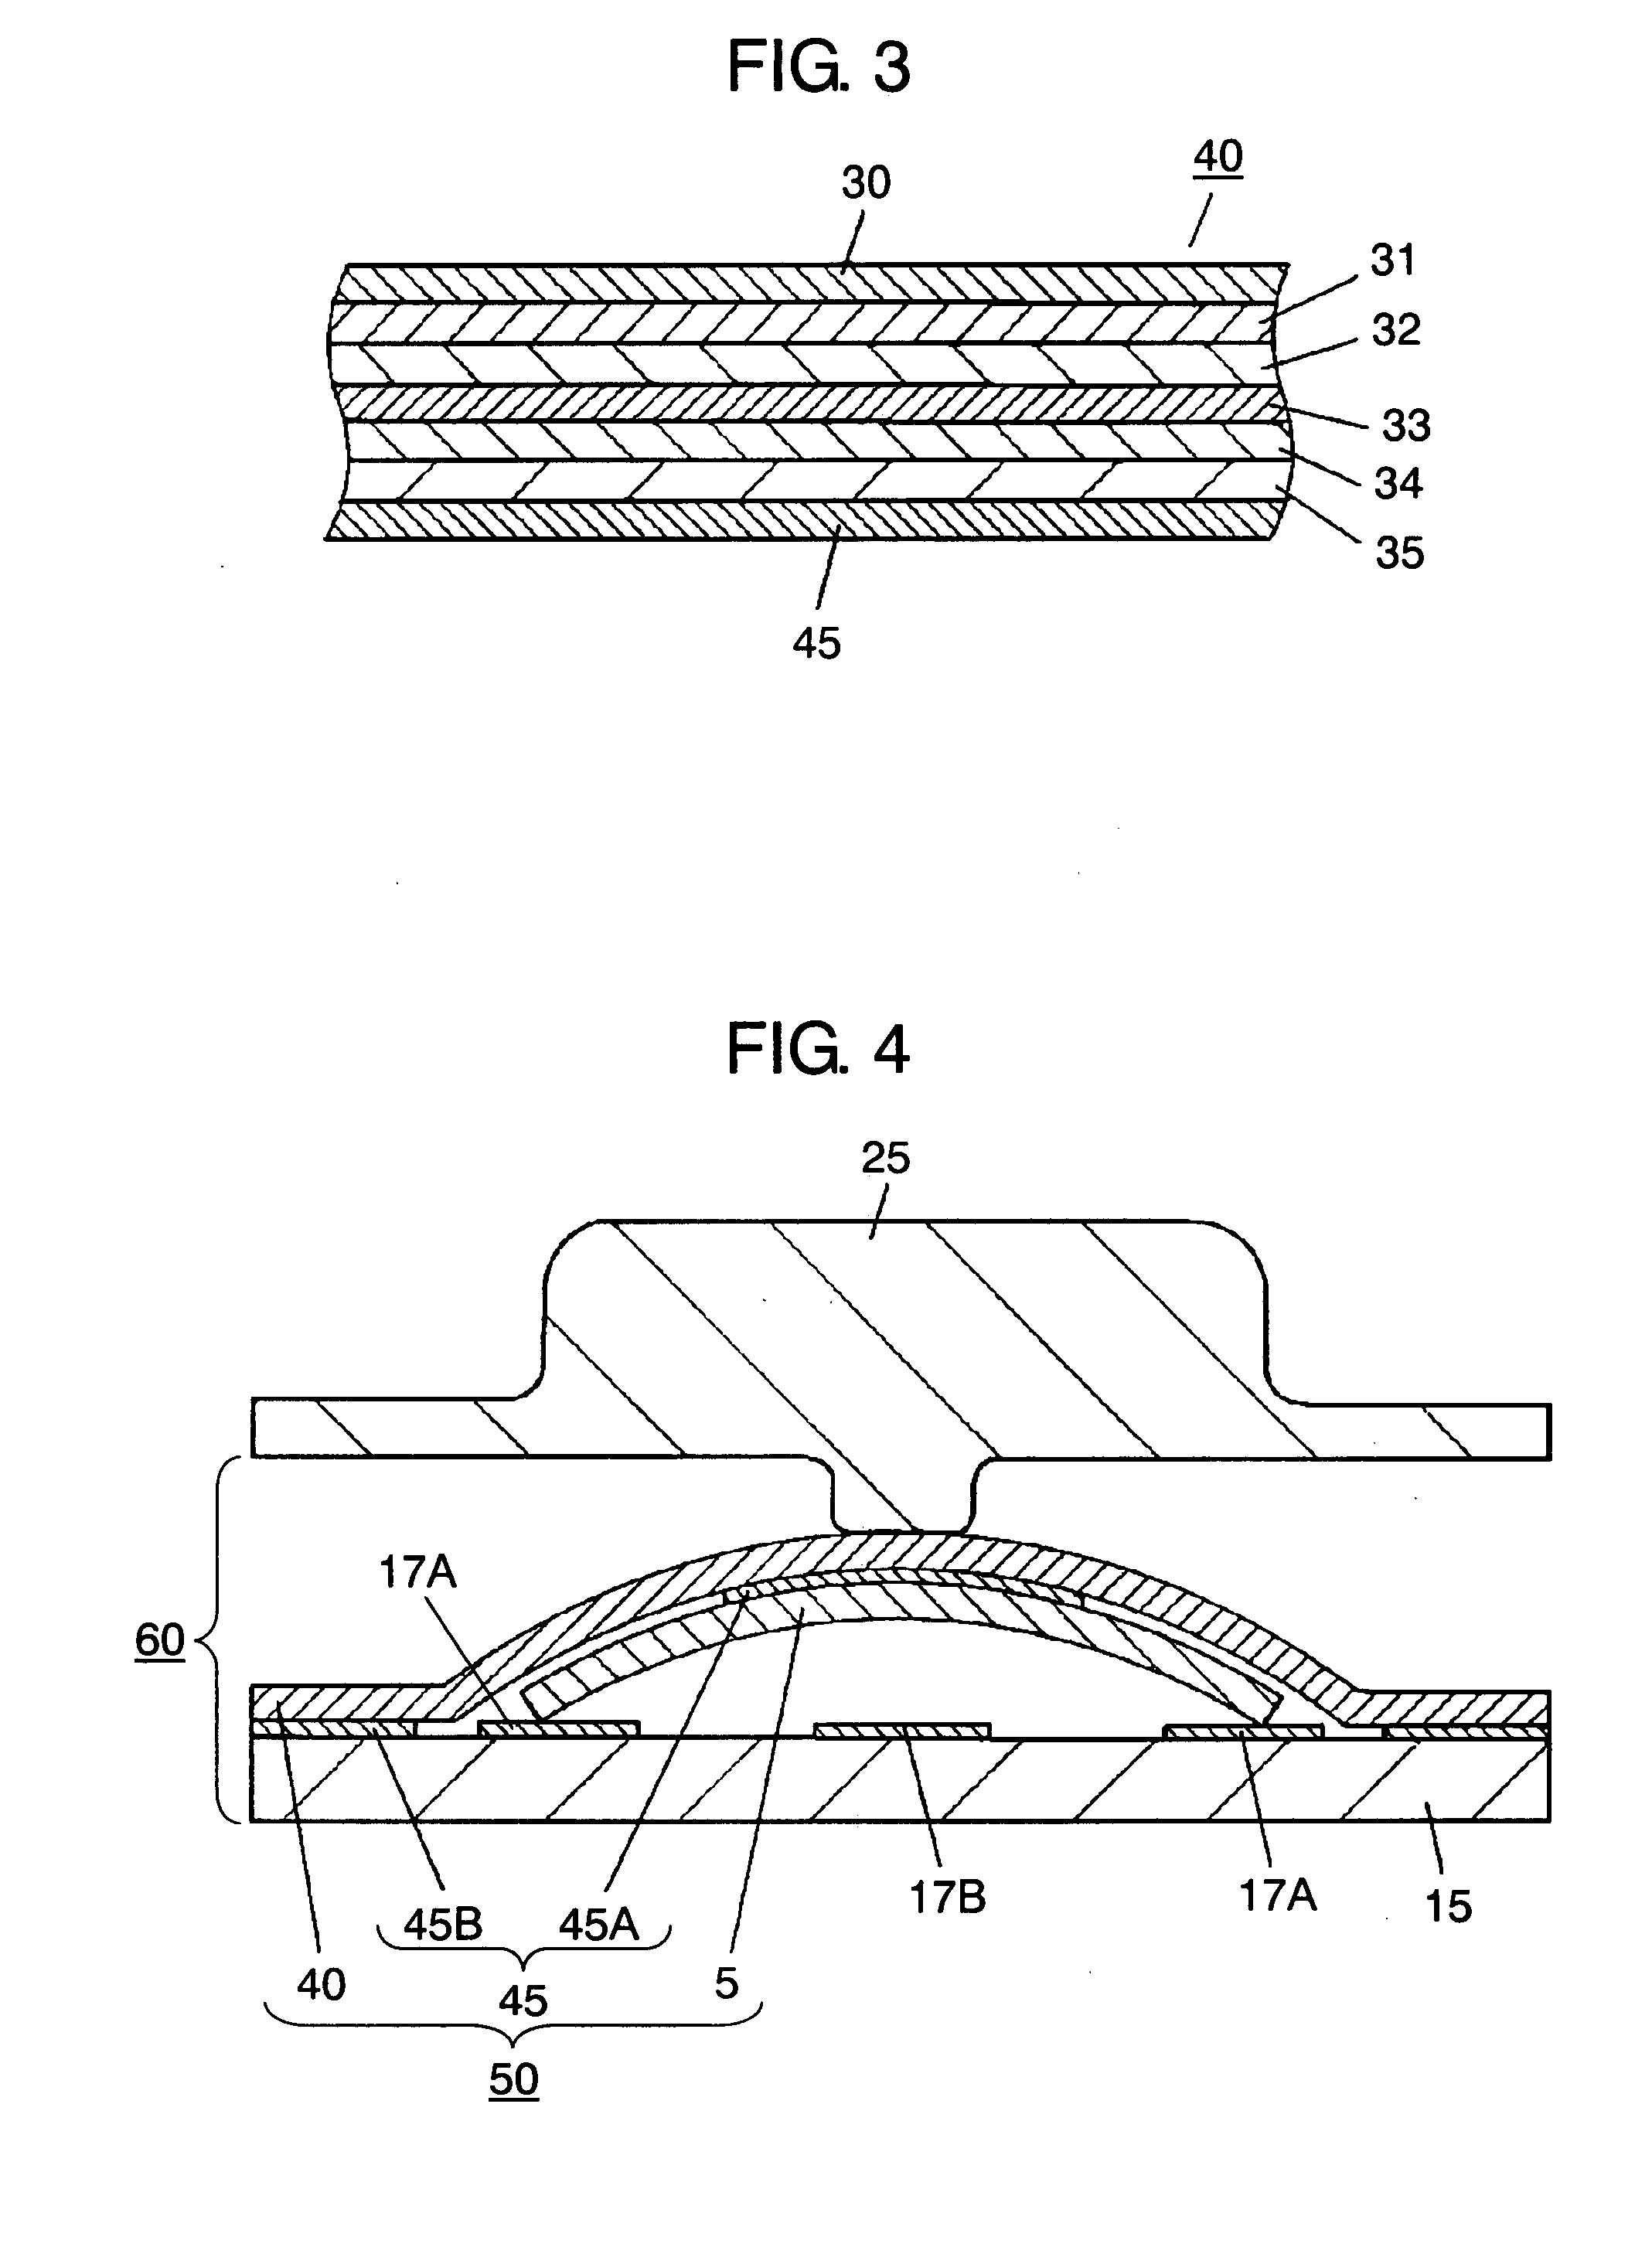 Movable-contact unit and panel switch using the same